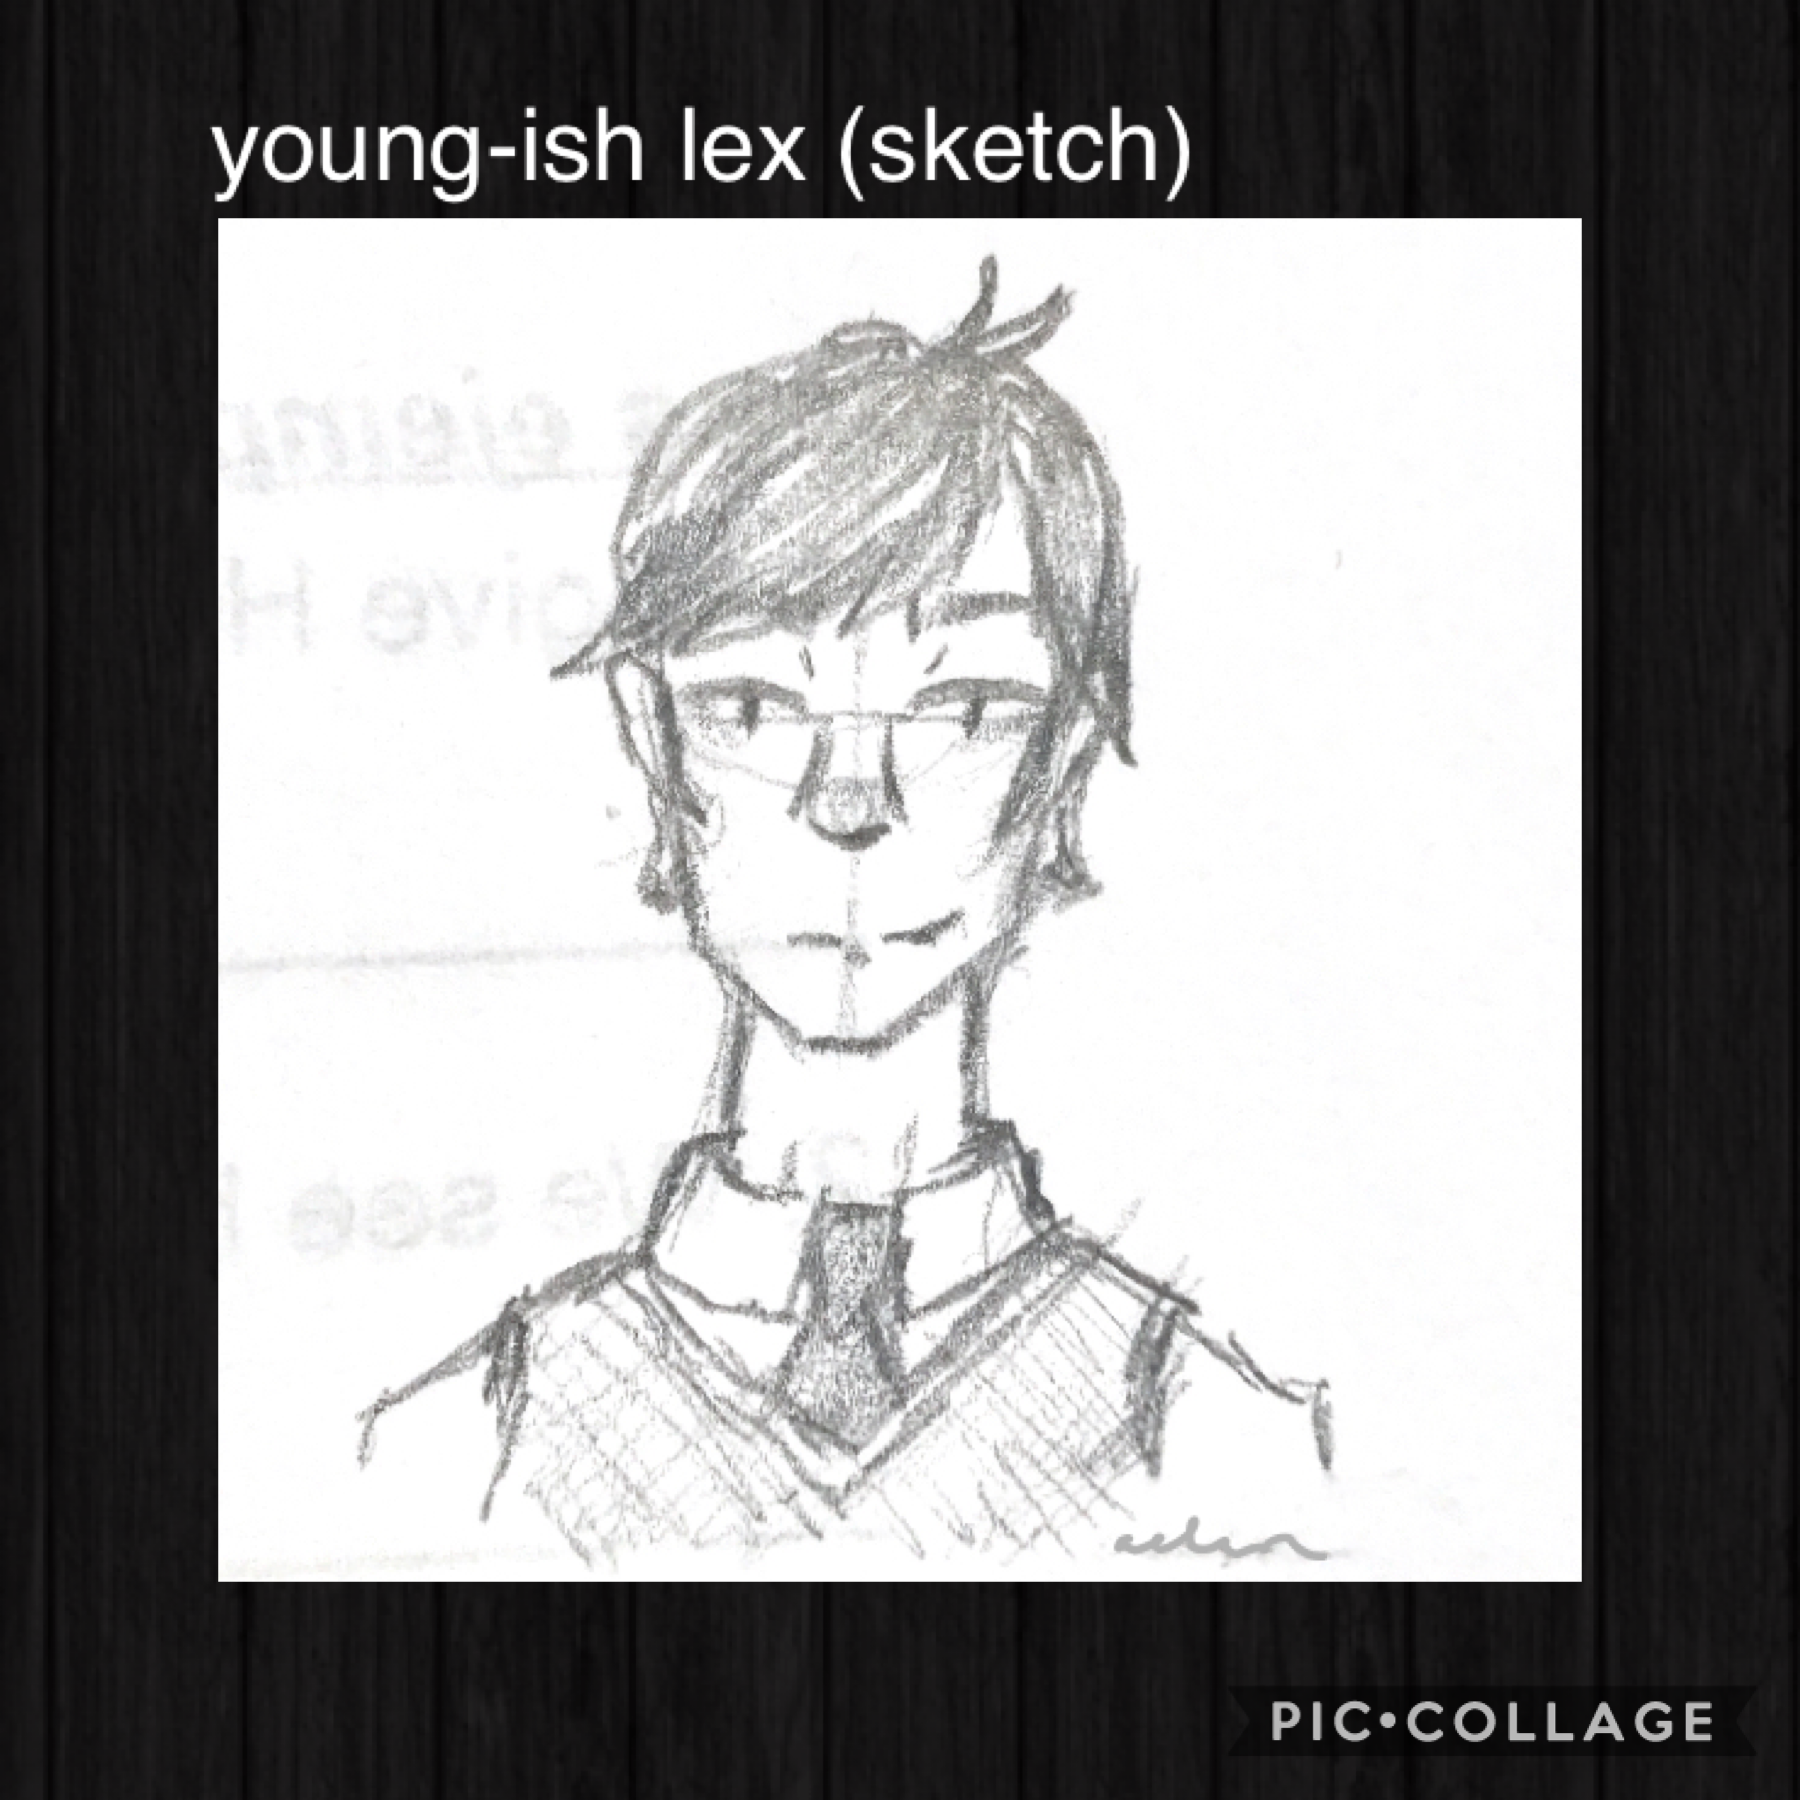 young lex yoUnG LEX - (tap)

a little sketch of 16 yr old lex i did in spanish lol. this is before he was struck by lightning (he doesn’t get struck until he’s 20). also he went to a private/boarding school when he was younger so that’s why he’s dressed n